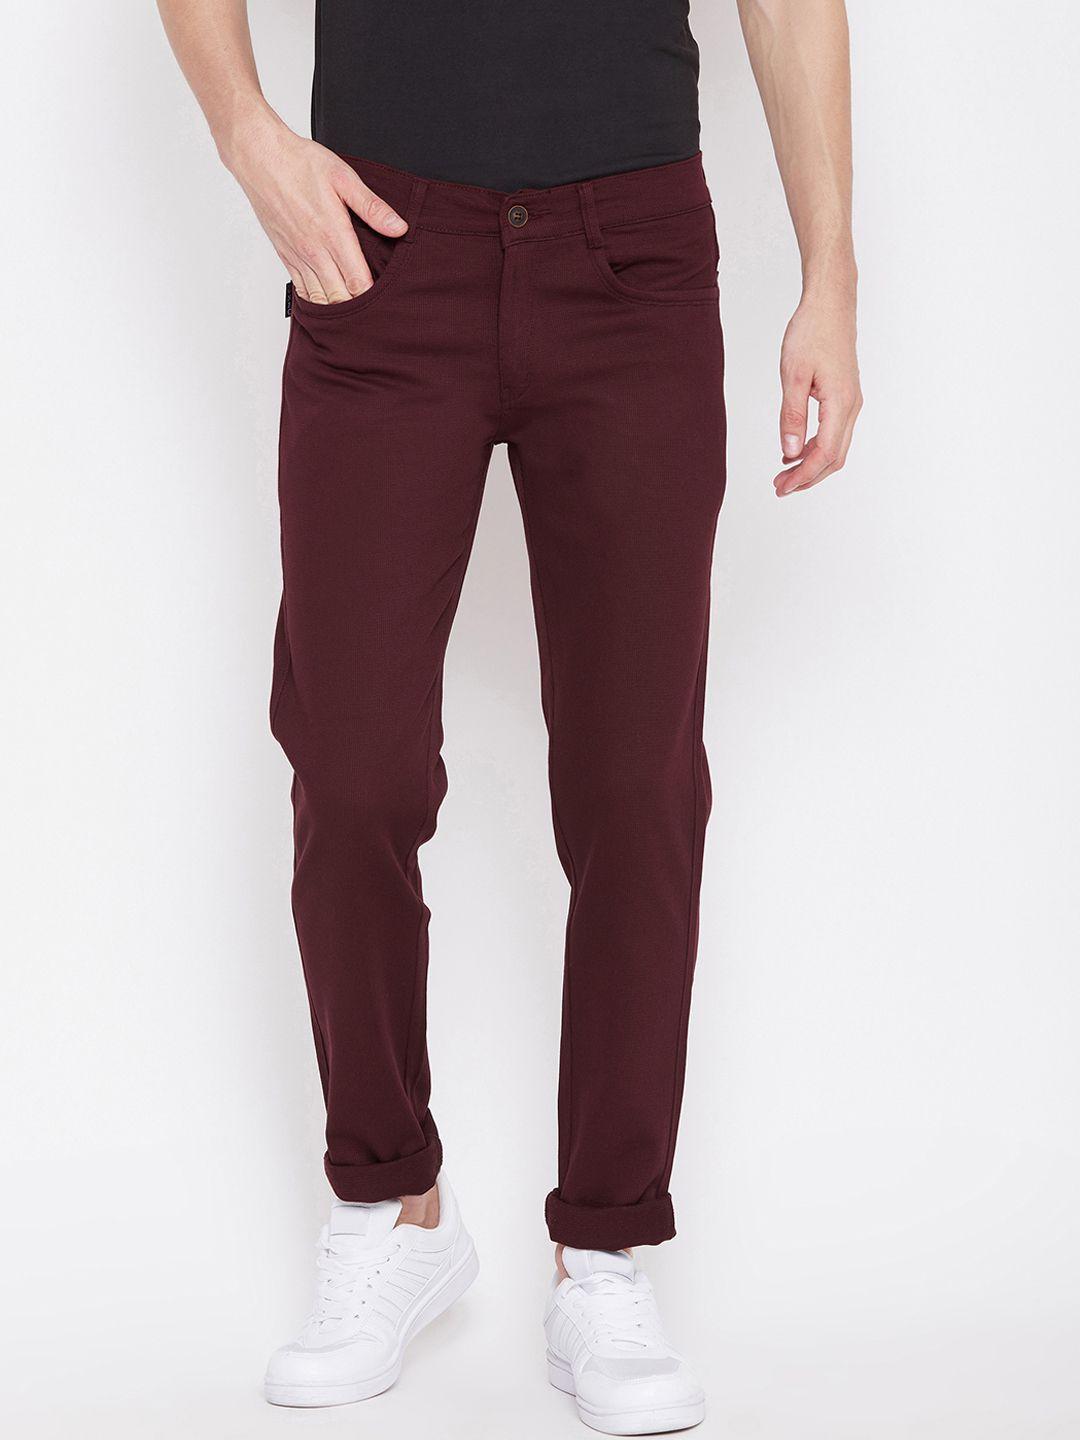 nation polo club men maroon skinny fit solid regular trousers